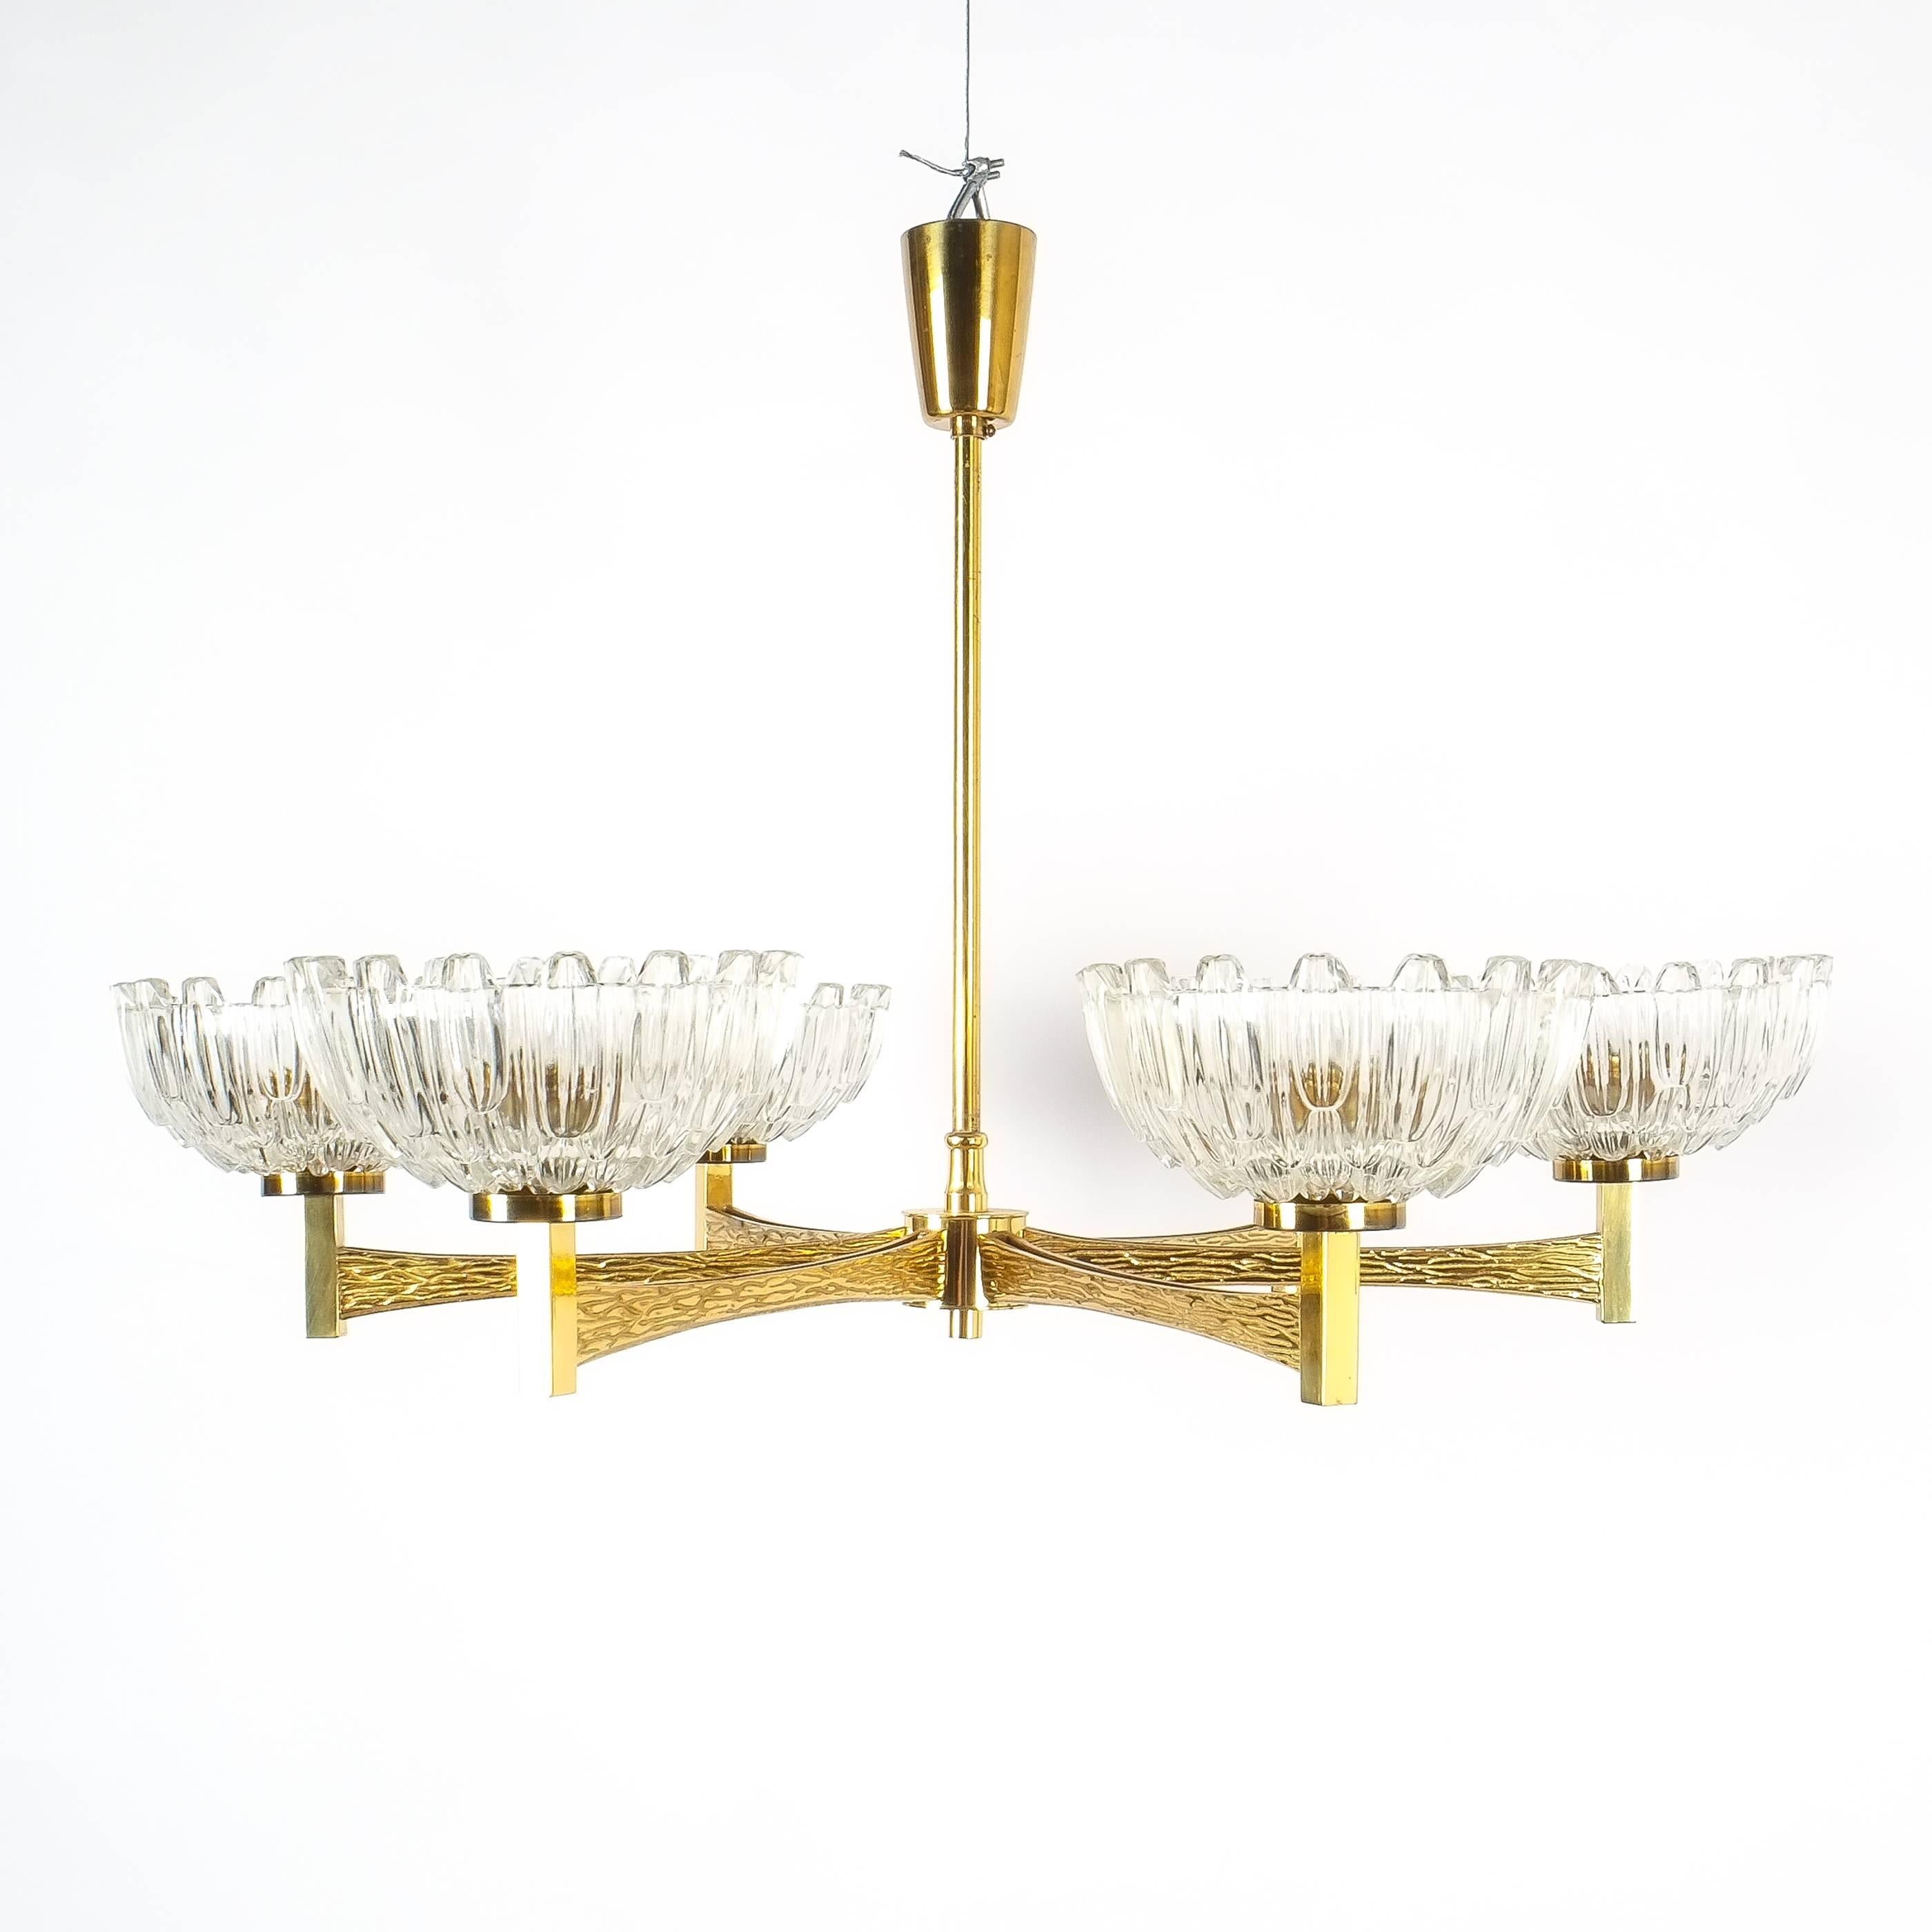 Hans-Agne Jakobsson Attributed Six-Arm Chandelier from Brass Glass, 1960 For Sale 2